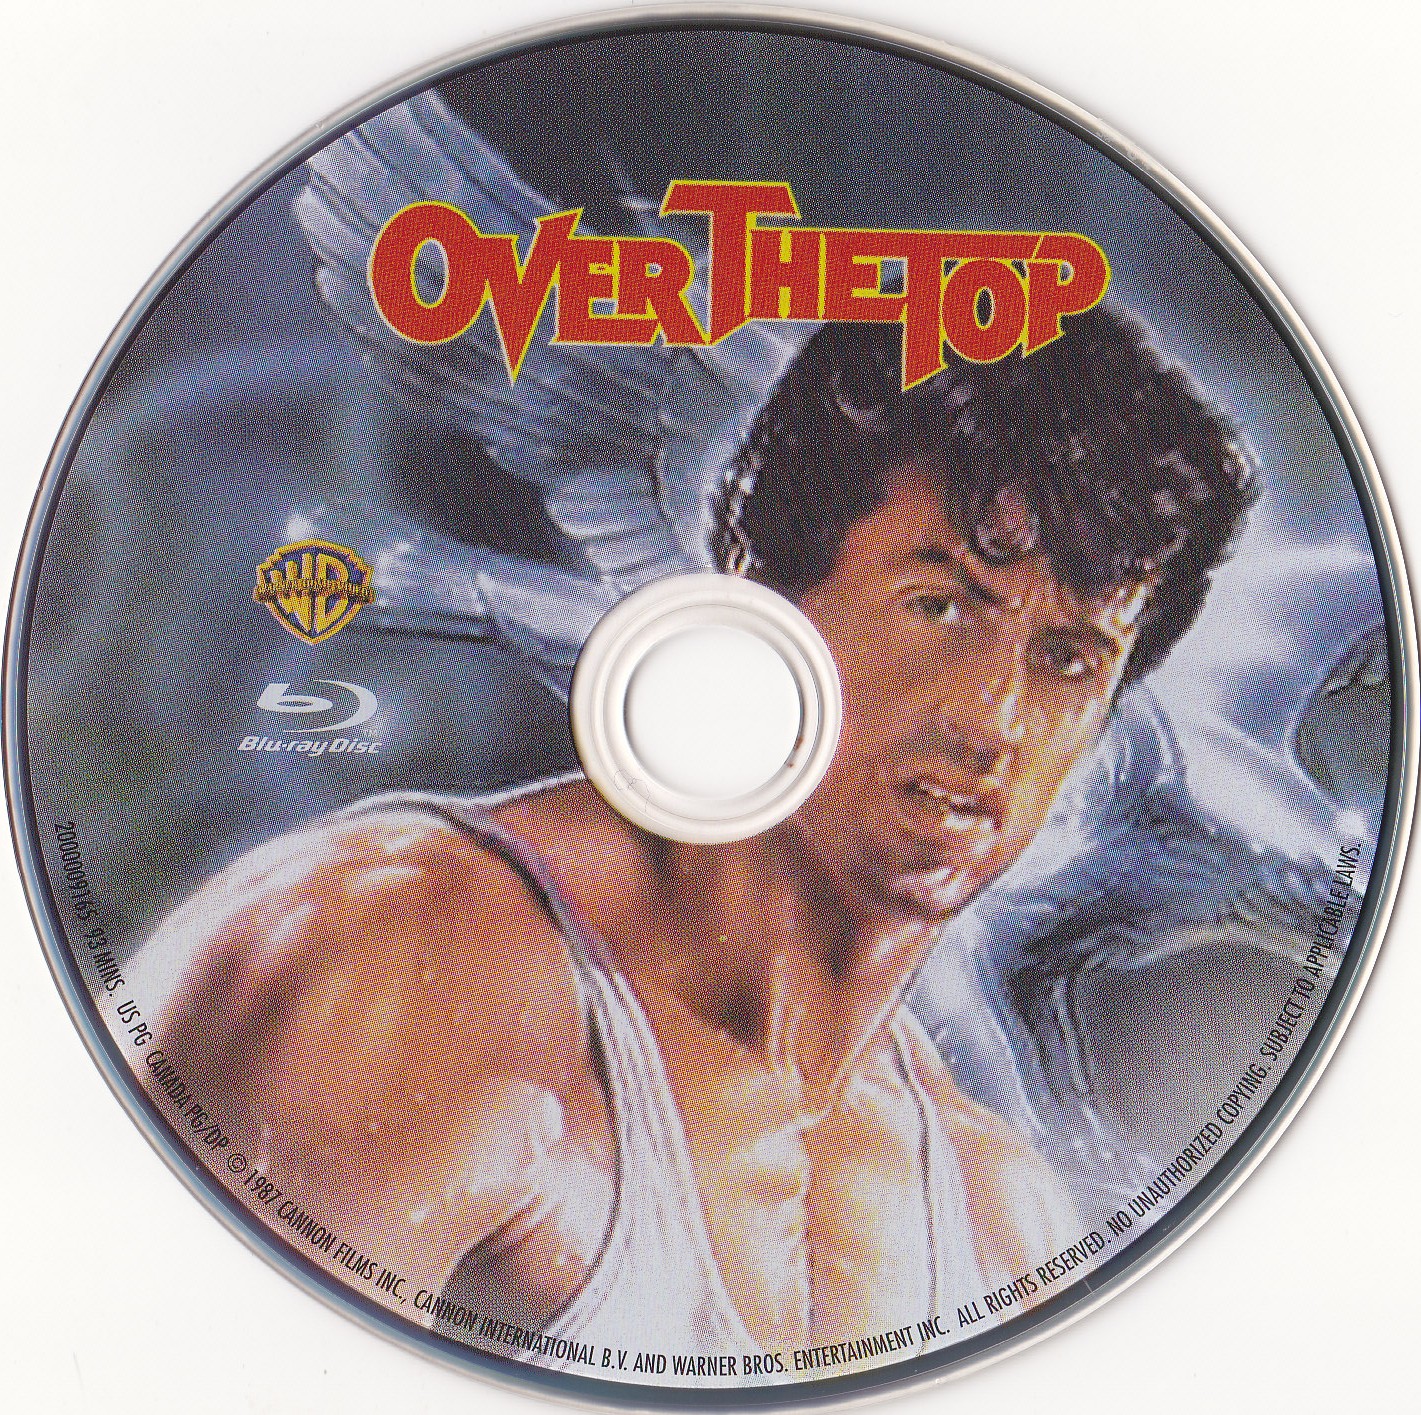 Over the Top Zone 1 (BLU-RAY)